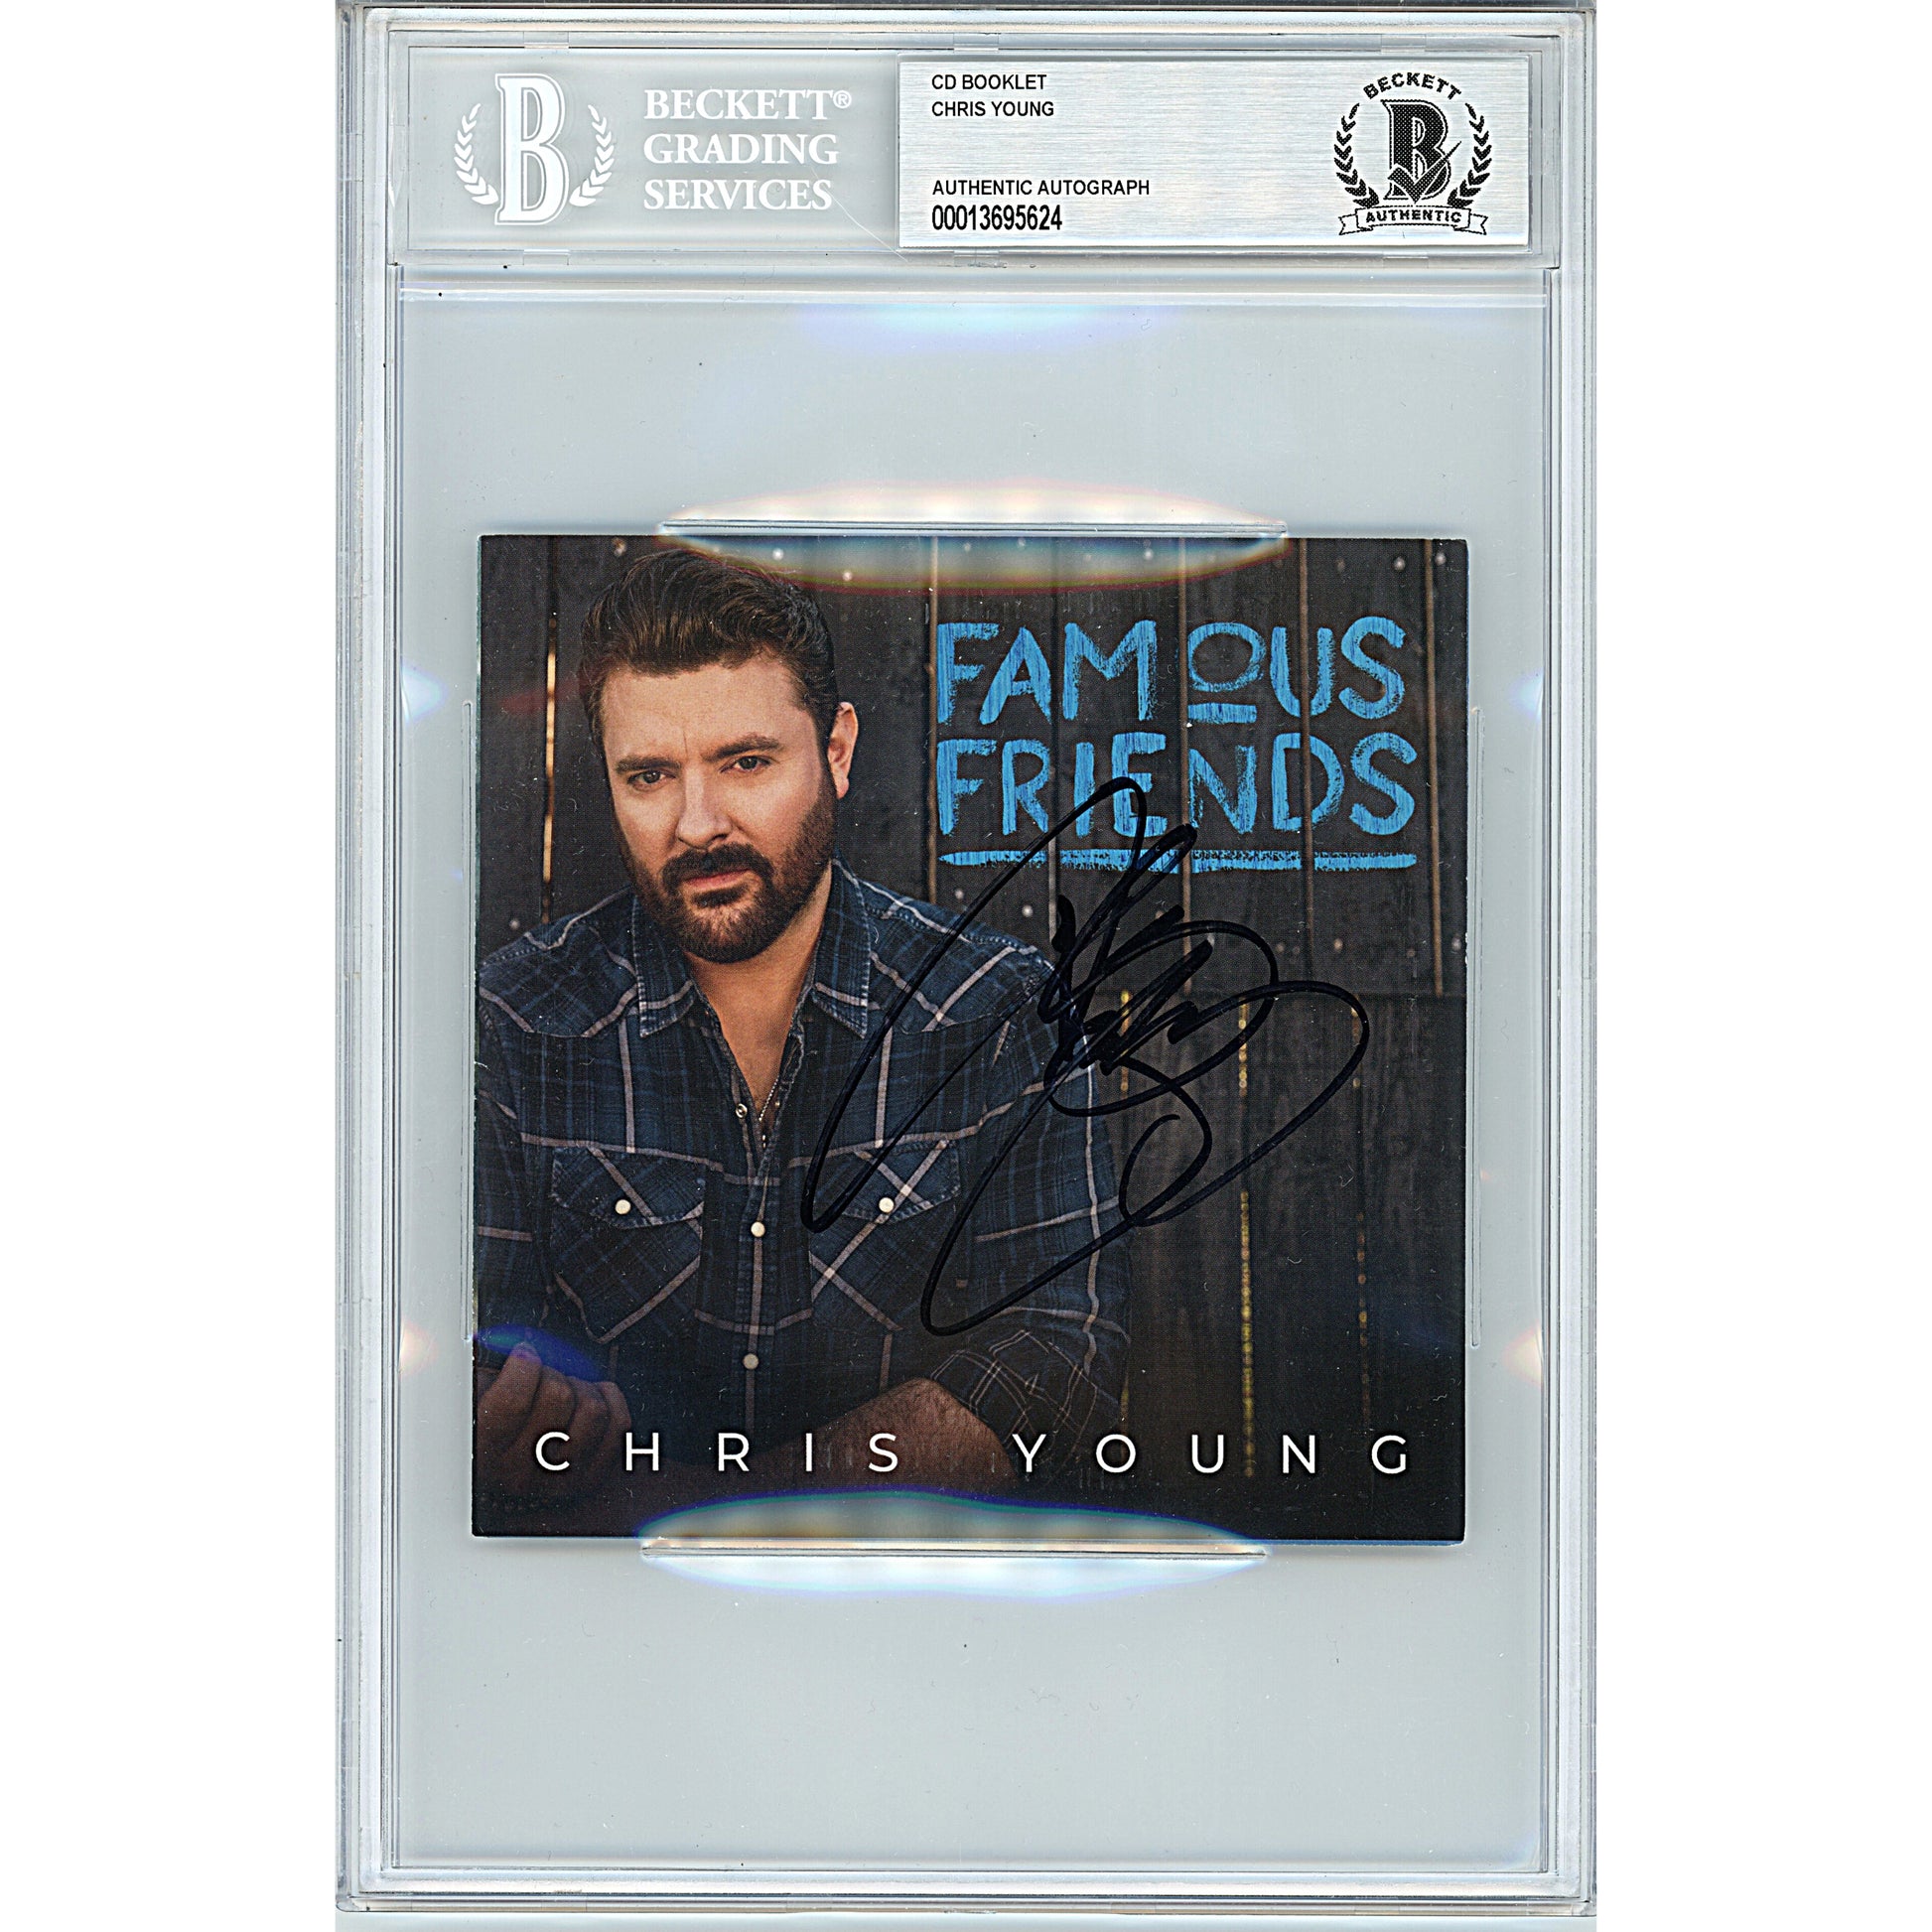 Music- Autographed- Chris Young Signed Famous Friends CD Cover Booklet Beckett Slabbed 00013695624 - 101